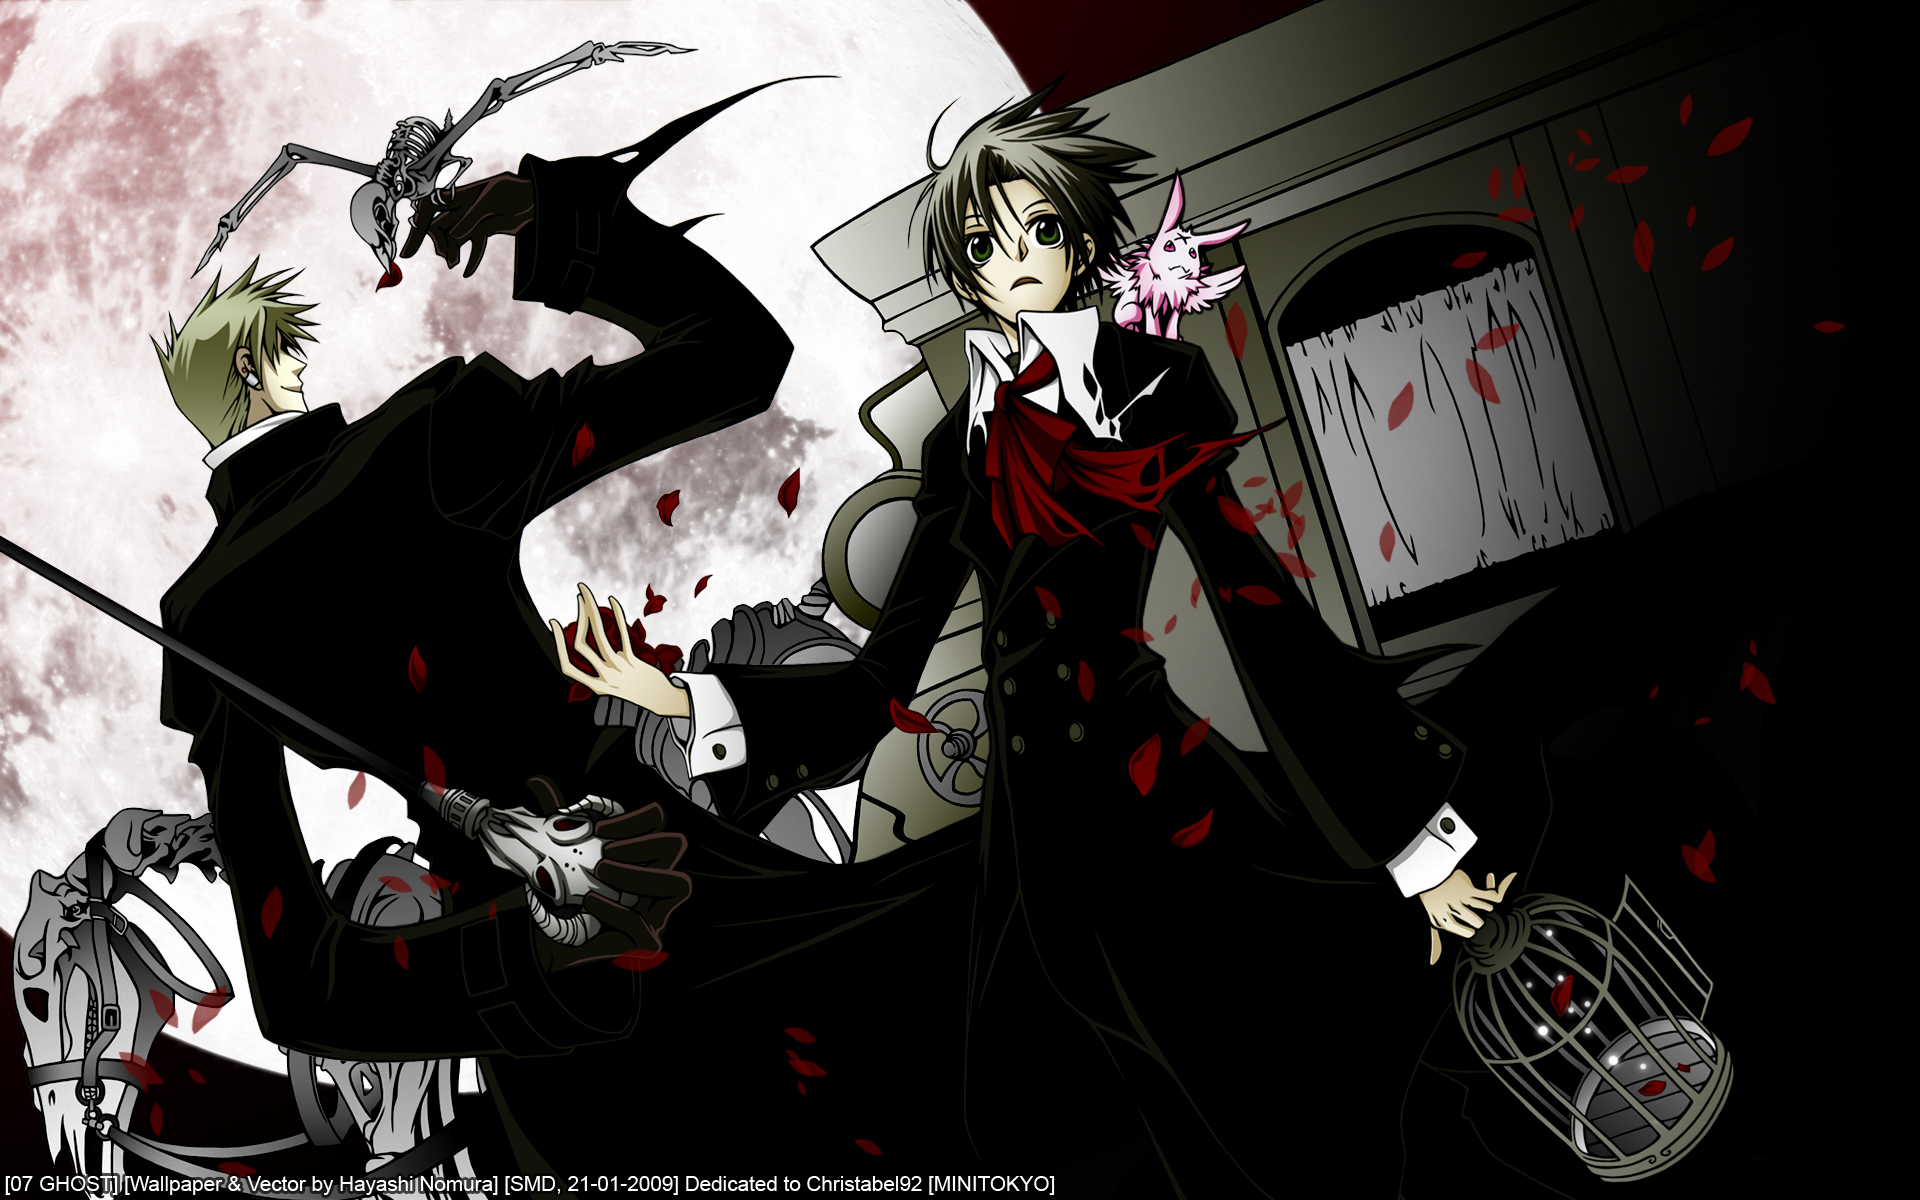 Anime desktop wallpaper featuring the characters from 07-Ghost, including Haruse.